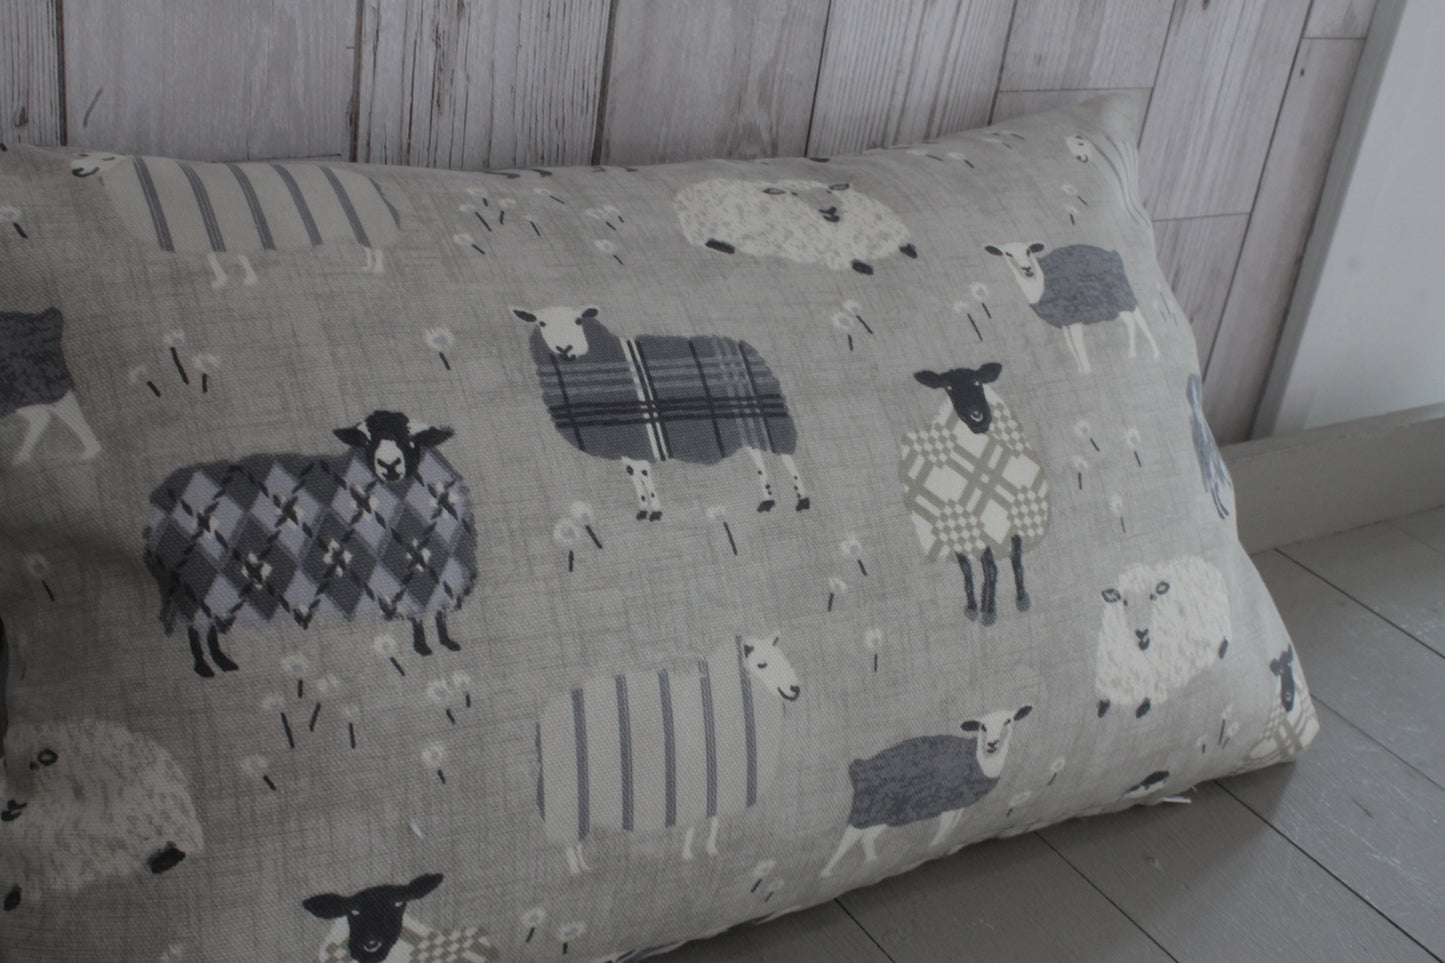 Woolly sheep Jumpers Cushion- Grey and Taupe- 20" x 12" Lumbar/Oblong Cushion - Lizzie Dixon Designs